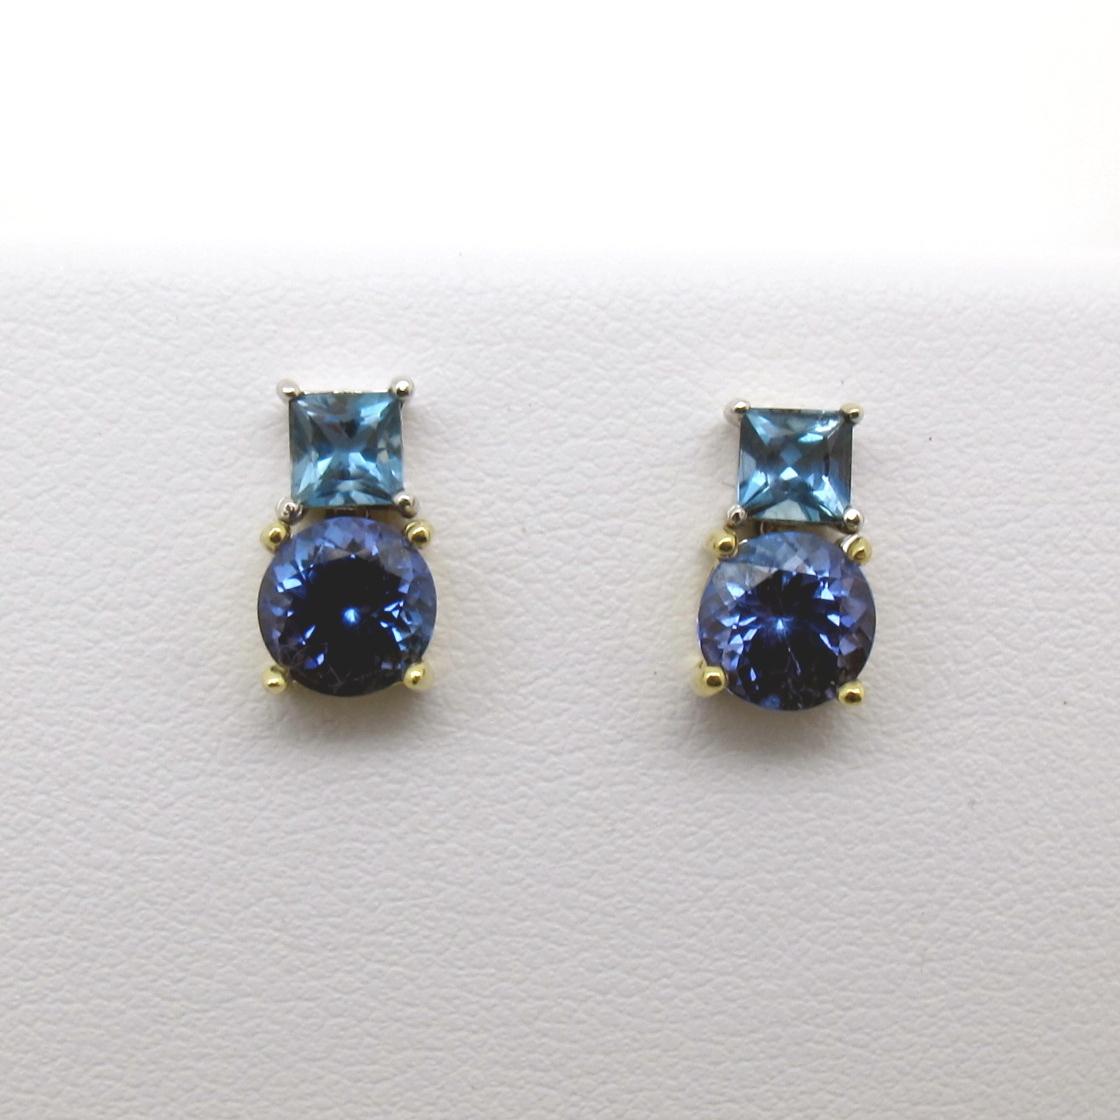 A combination of  violet colored tanzanites and  deep aqua-blue aquamarines make a lovely color pairing in these beautiful earrings. We use only gemstones of  fine color, cut and clarity.  The tanzanites measure 6.5mm in diameter and weigh a total